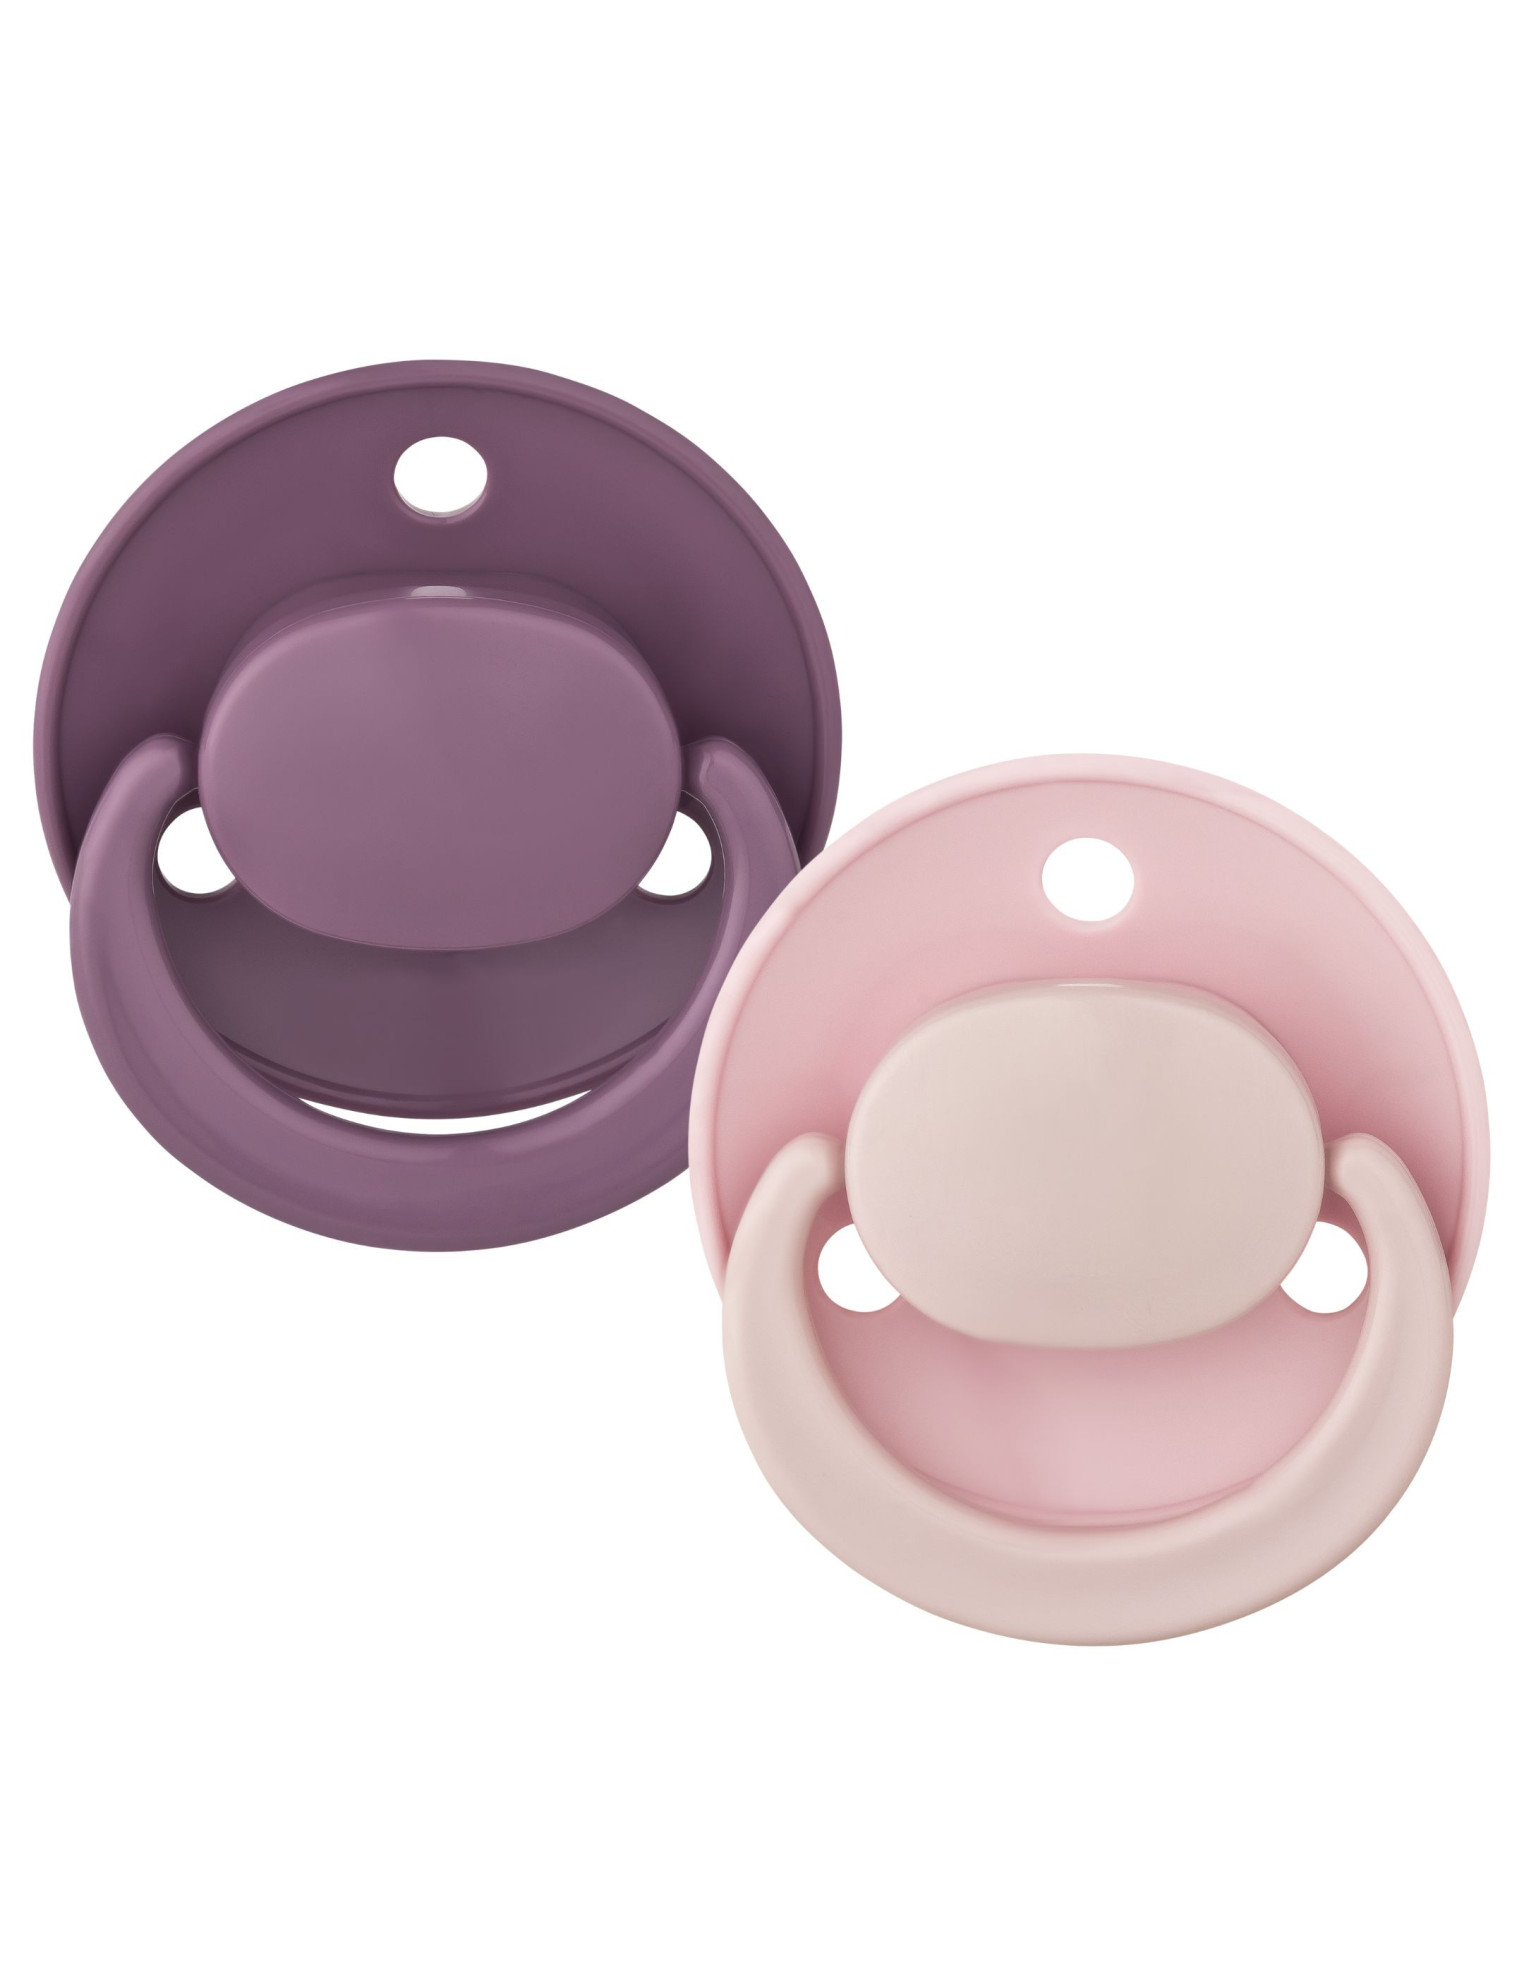 BIBS COLOUR PACIFIER SPECIAL EDITION LOT 2 SUCETTES TAILLE 2